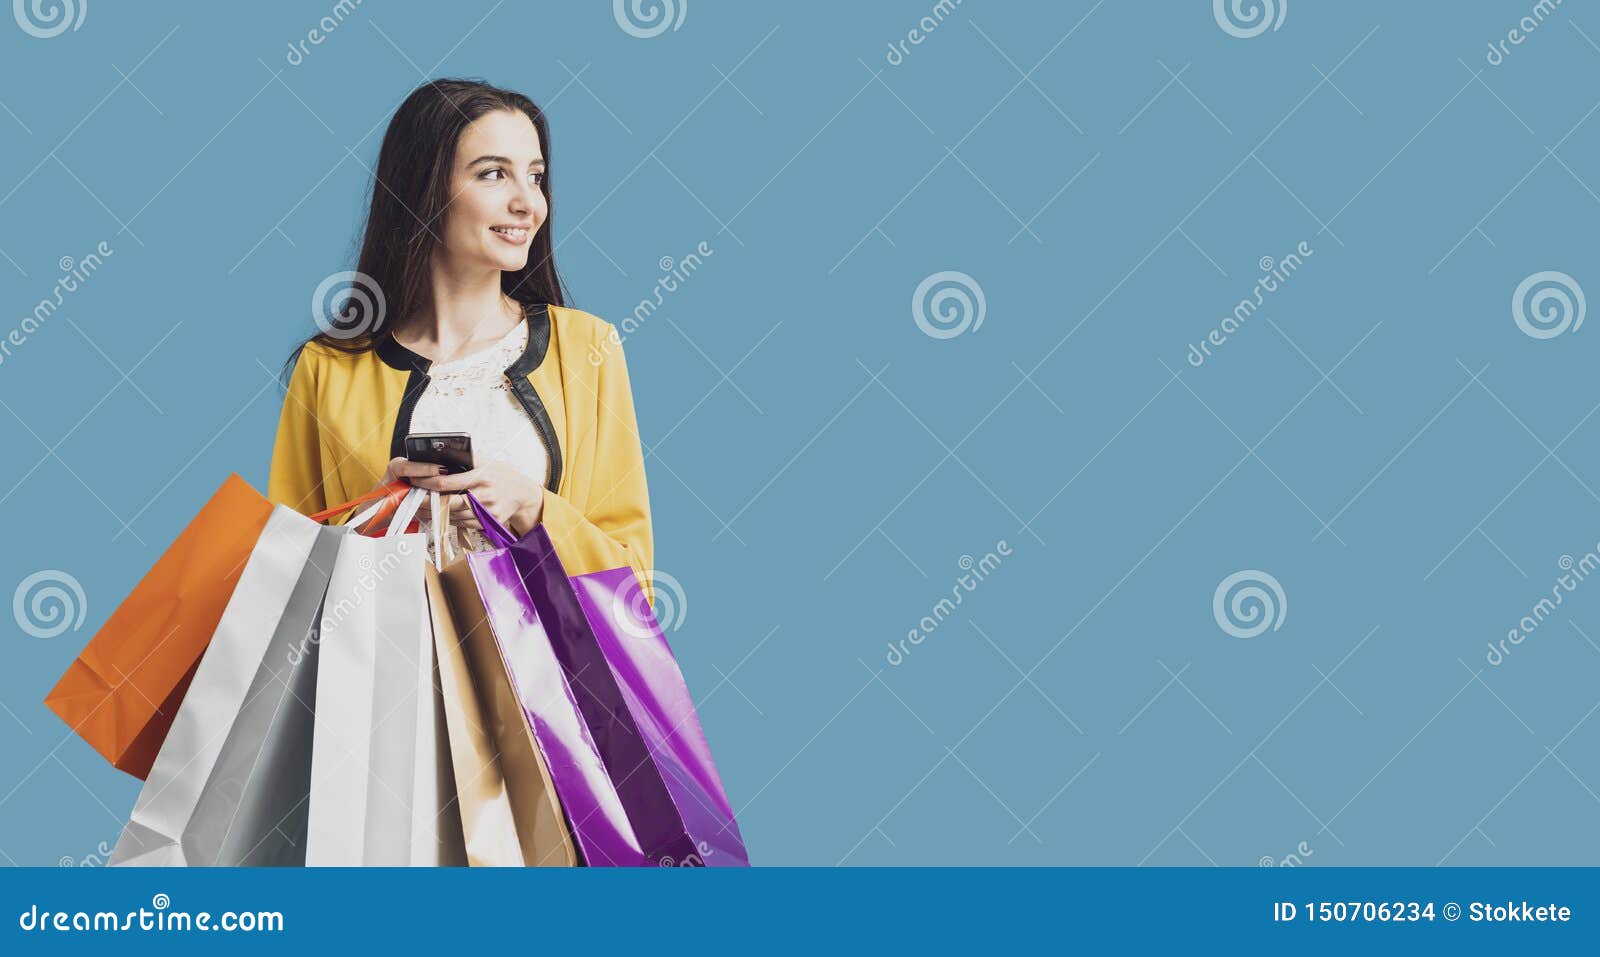 Happy Woman Using Shopping Apps Stock Photo - Image of shop, commercial ...